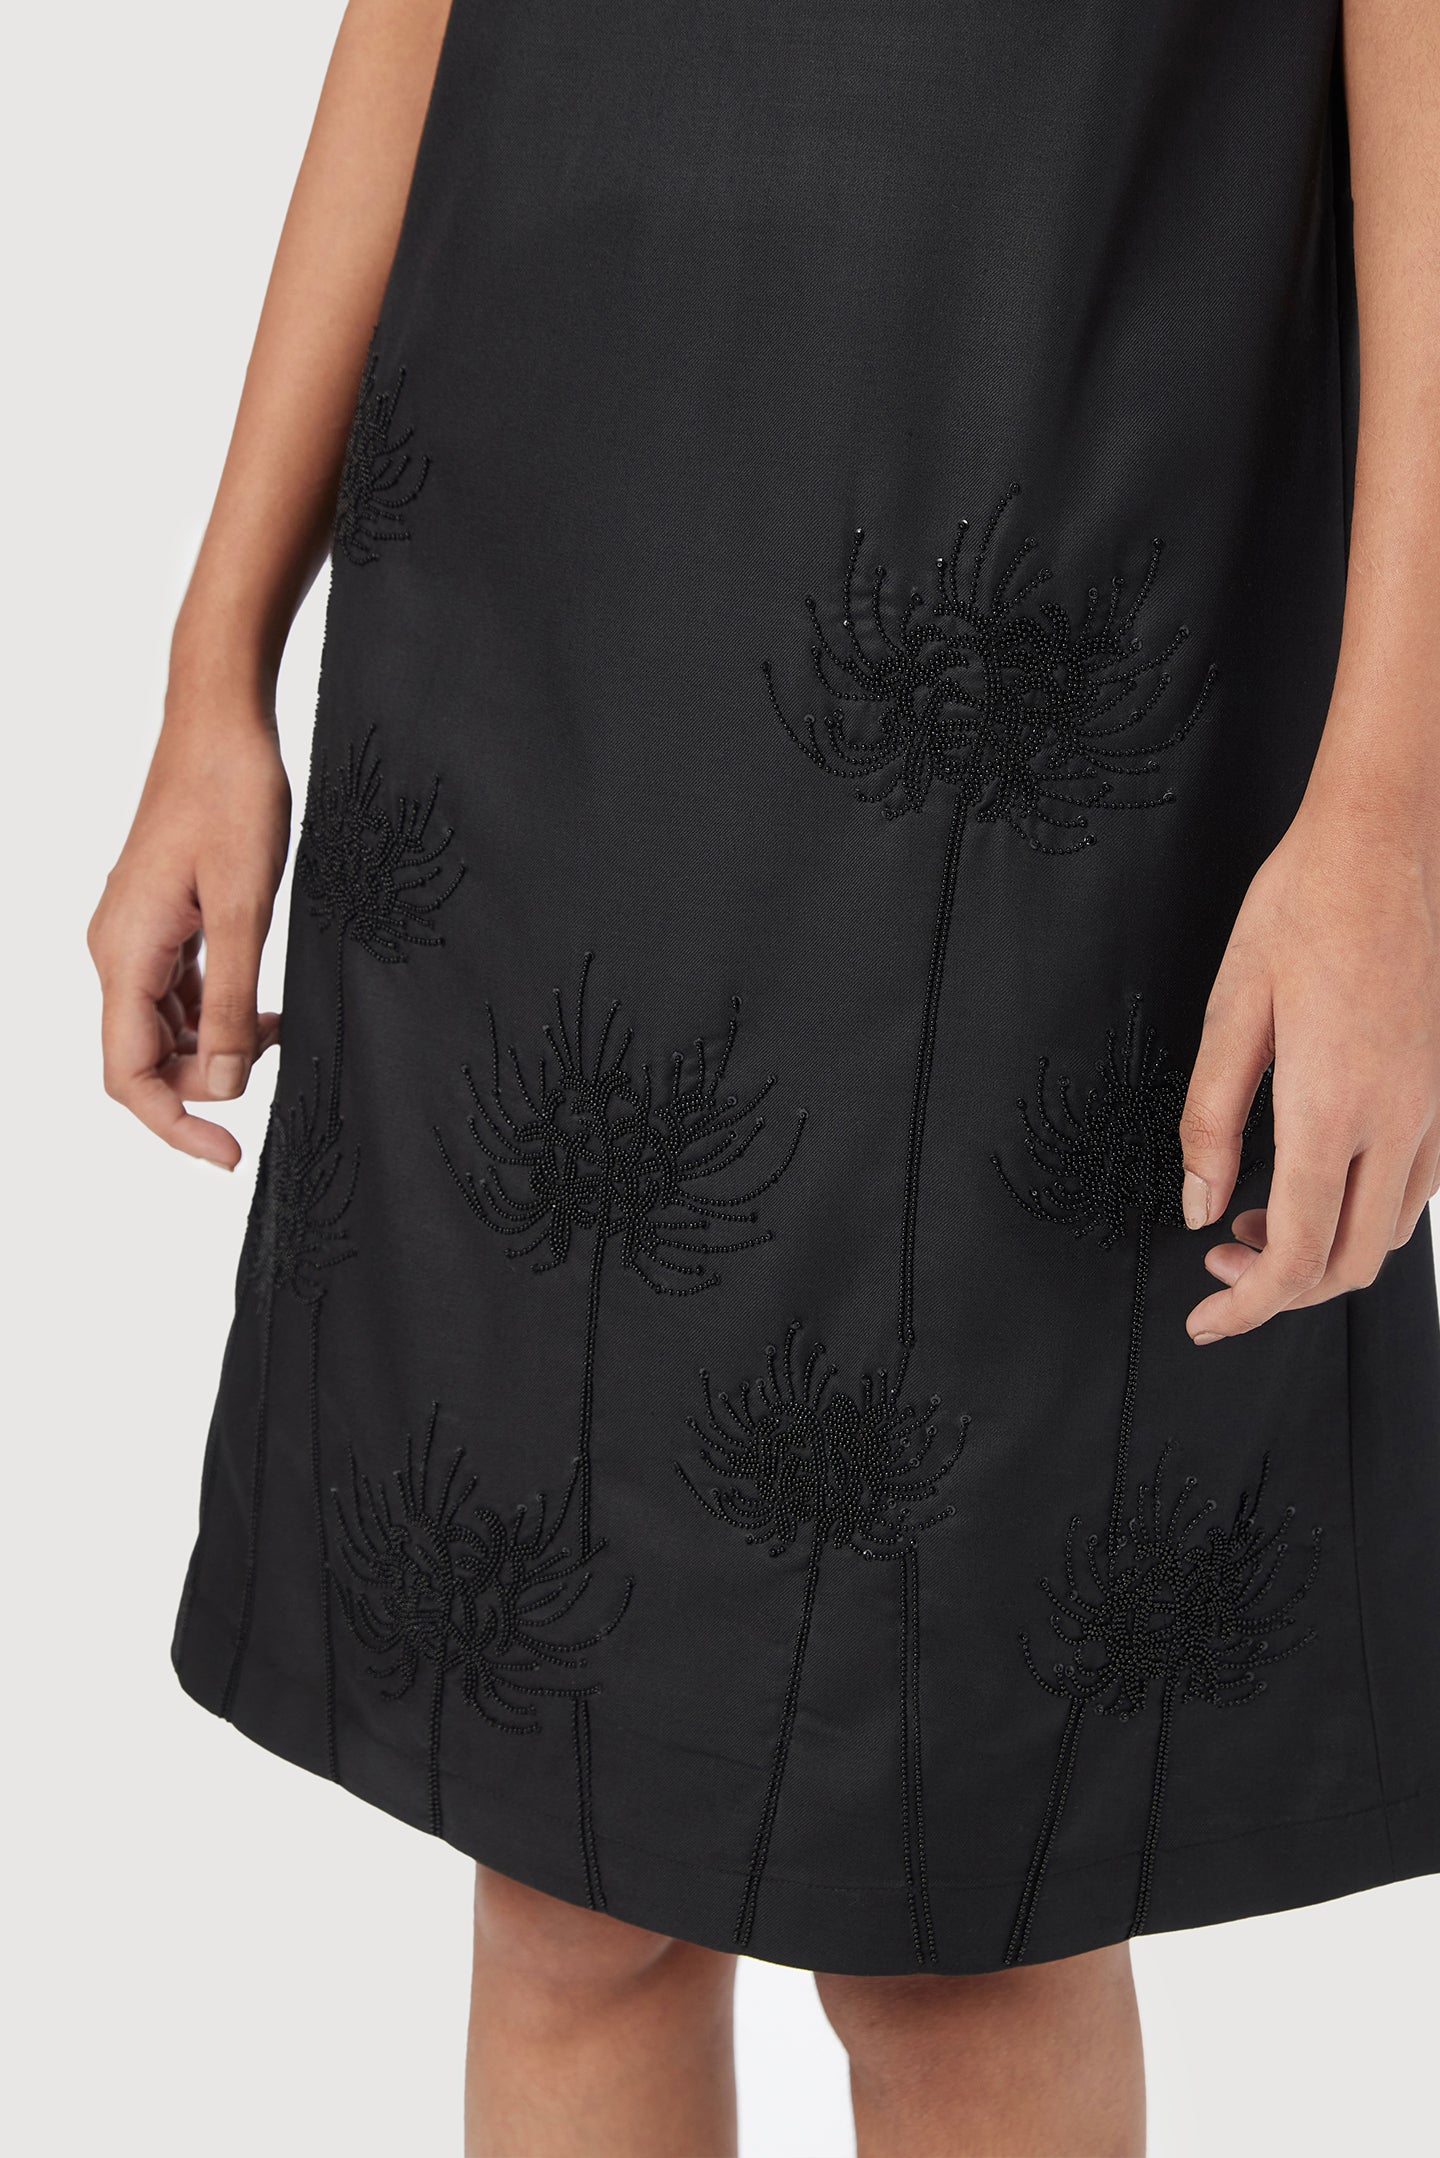 A-Line Sleeveless Dress with Chrysanthemum Beads Embroidery